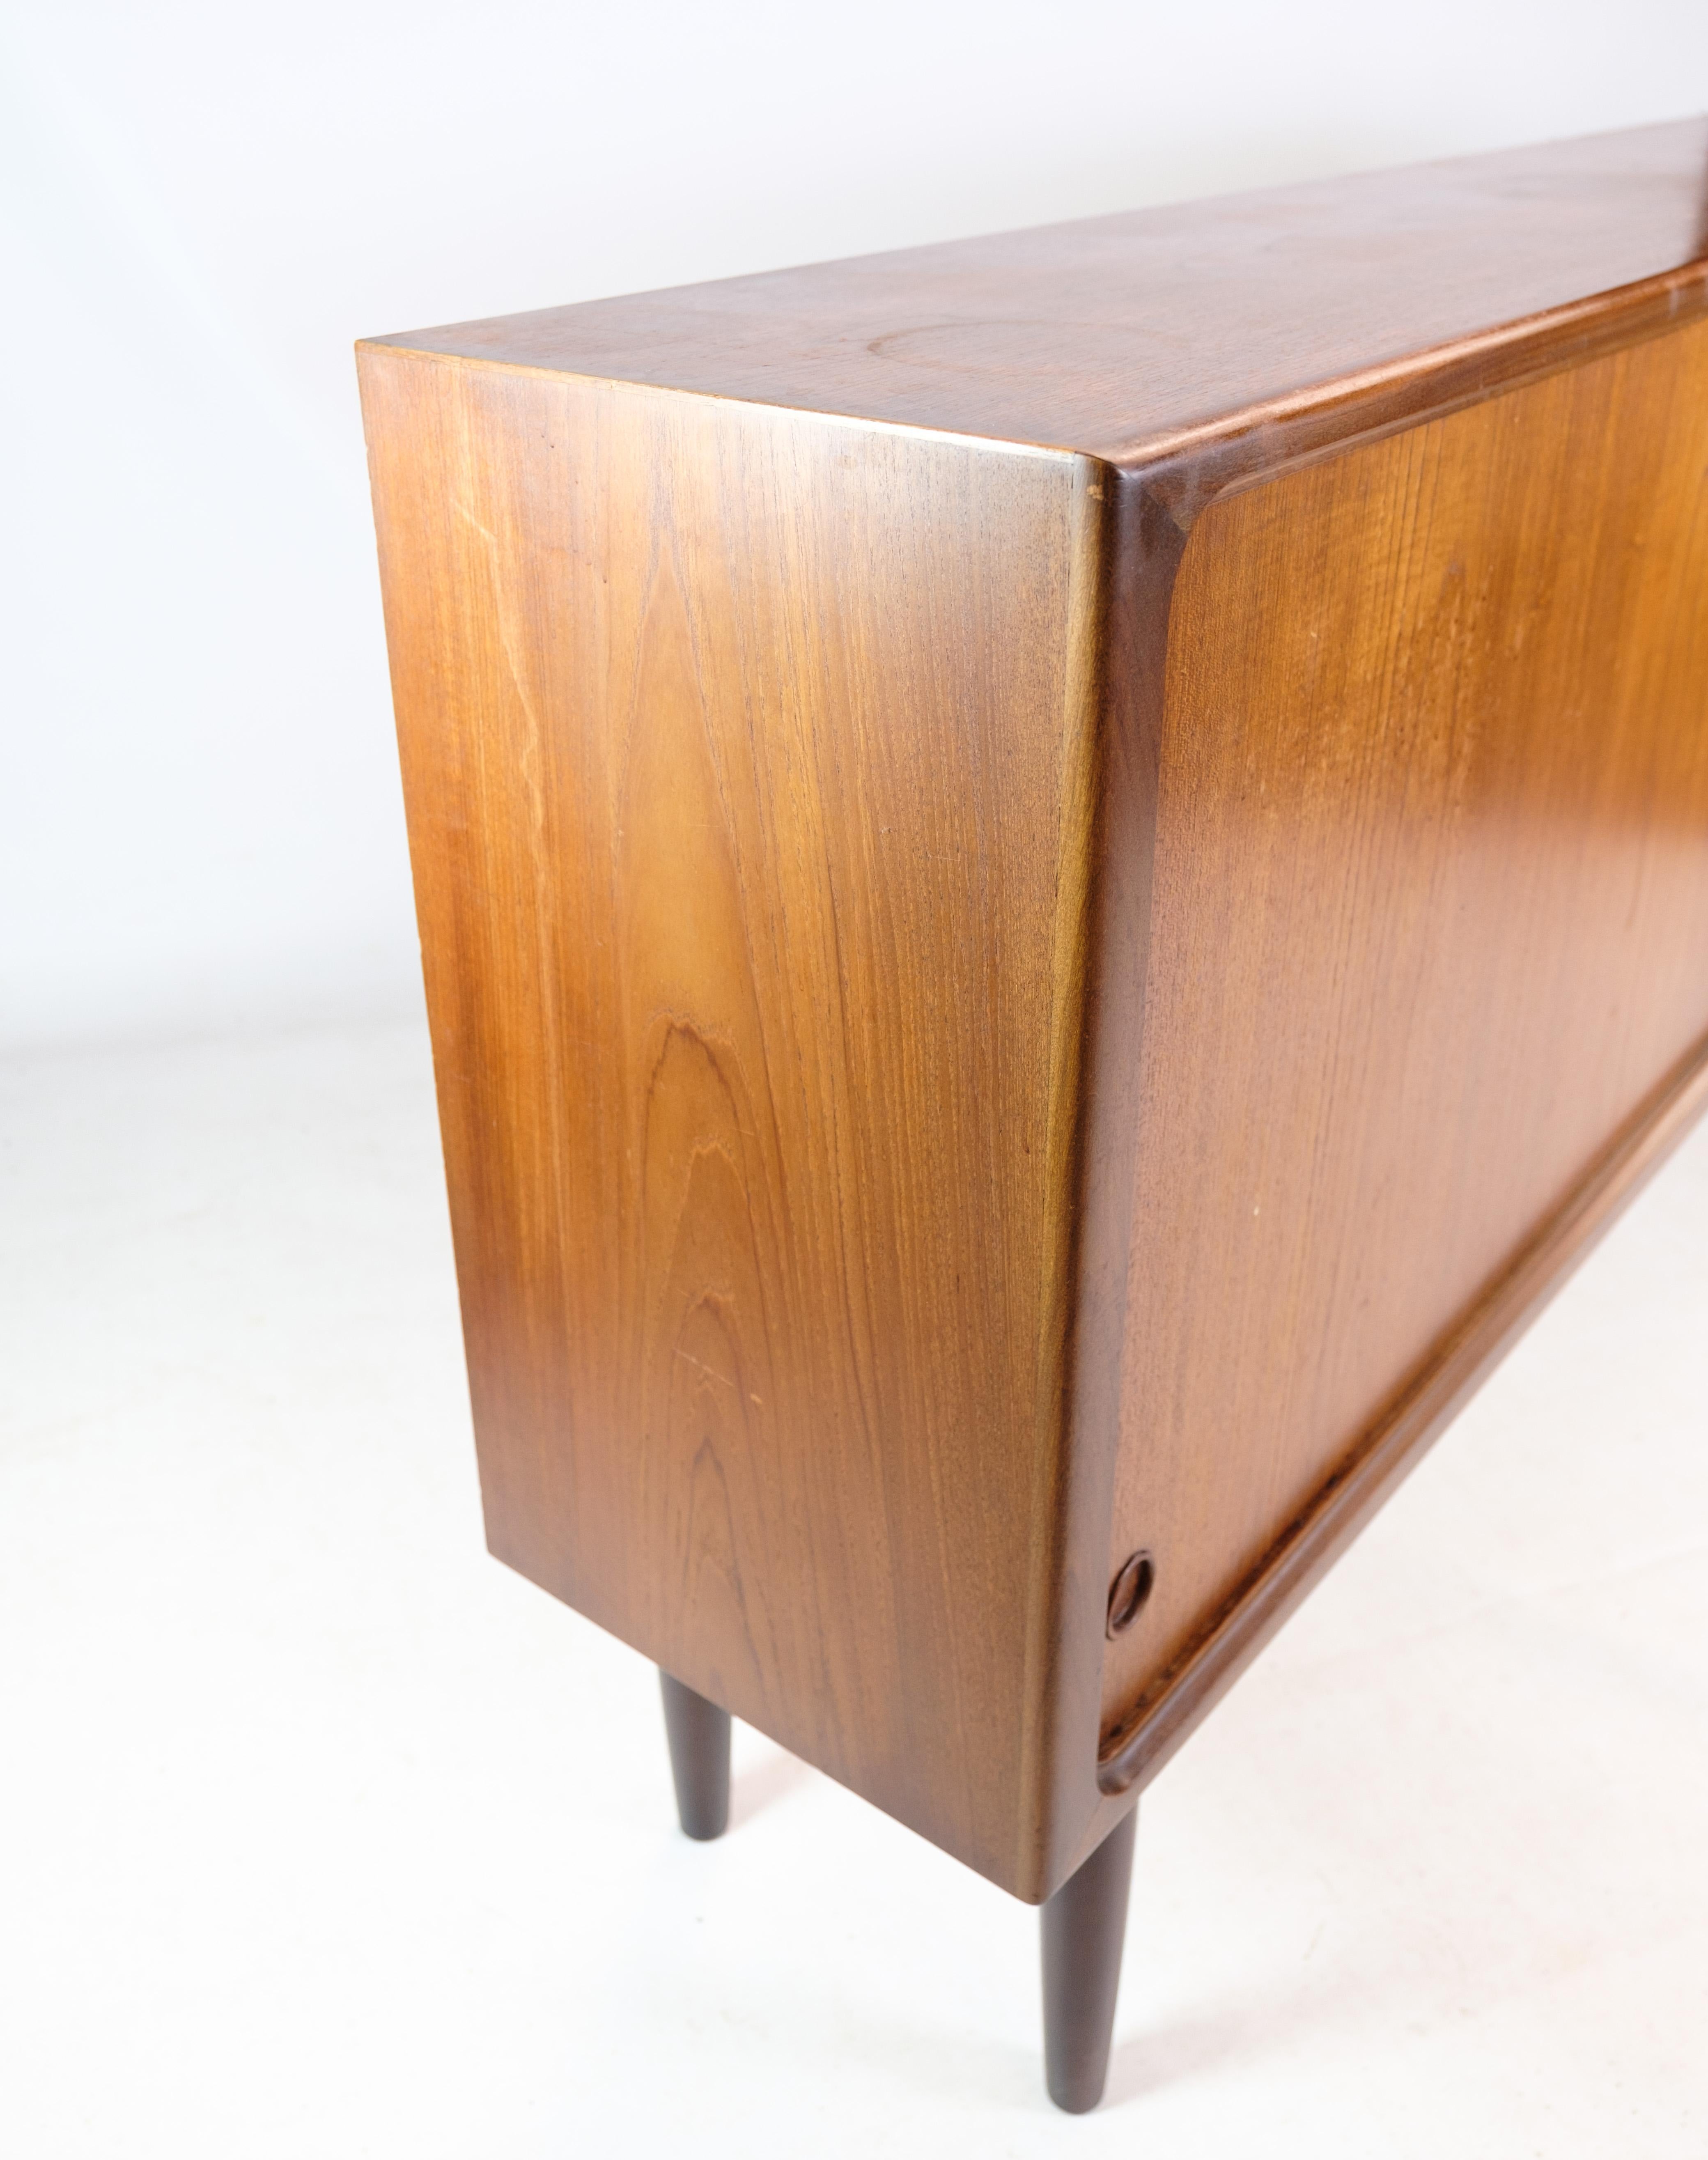 Mid-20th Century Sideboard Made In Teak, Danish Design From 1960s For Sale